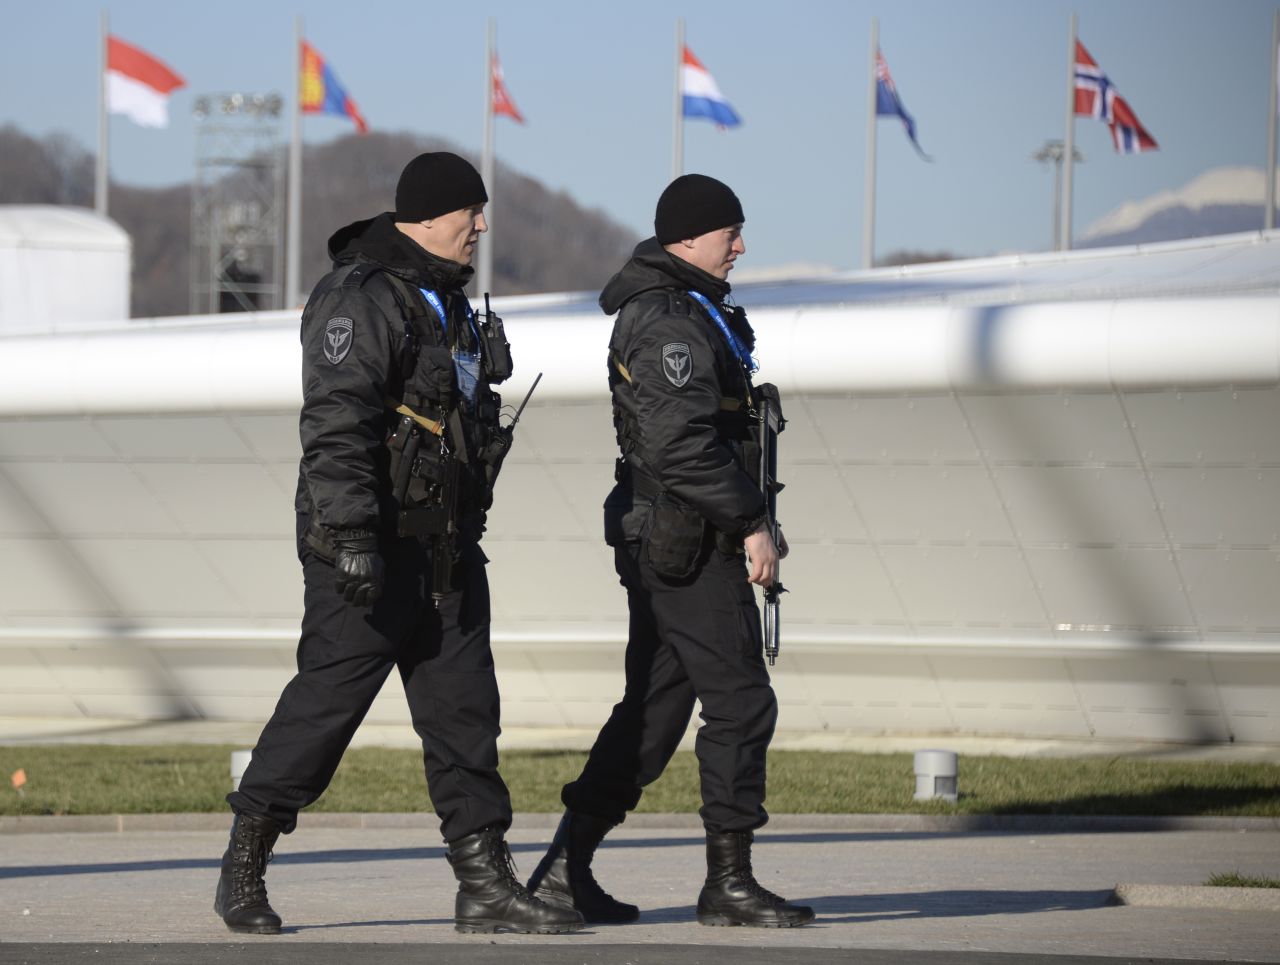 Two suicide bombings in the city of Volgograd had increased fears that Sochi could be a target for terrorist attacks. However an increased police presence, including 400 Cossacks, ensured the safety of the Games.